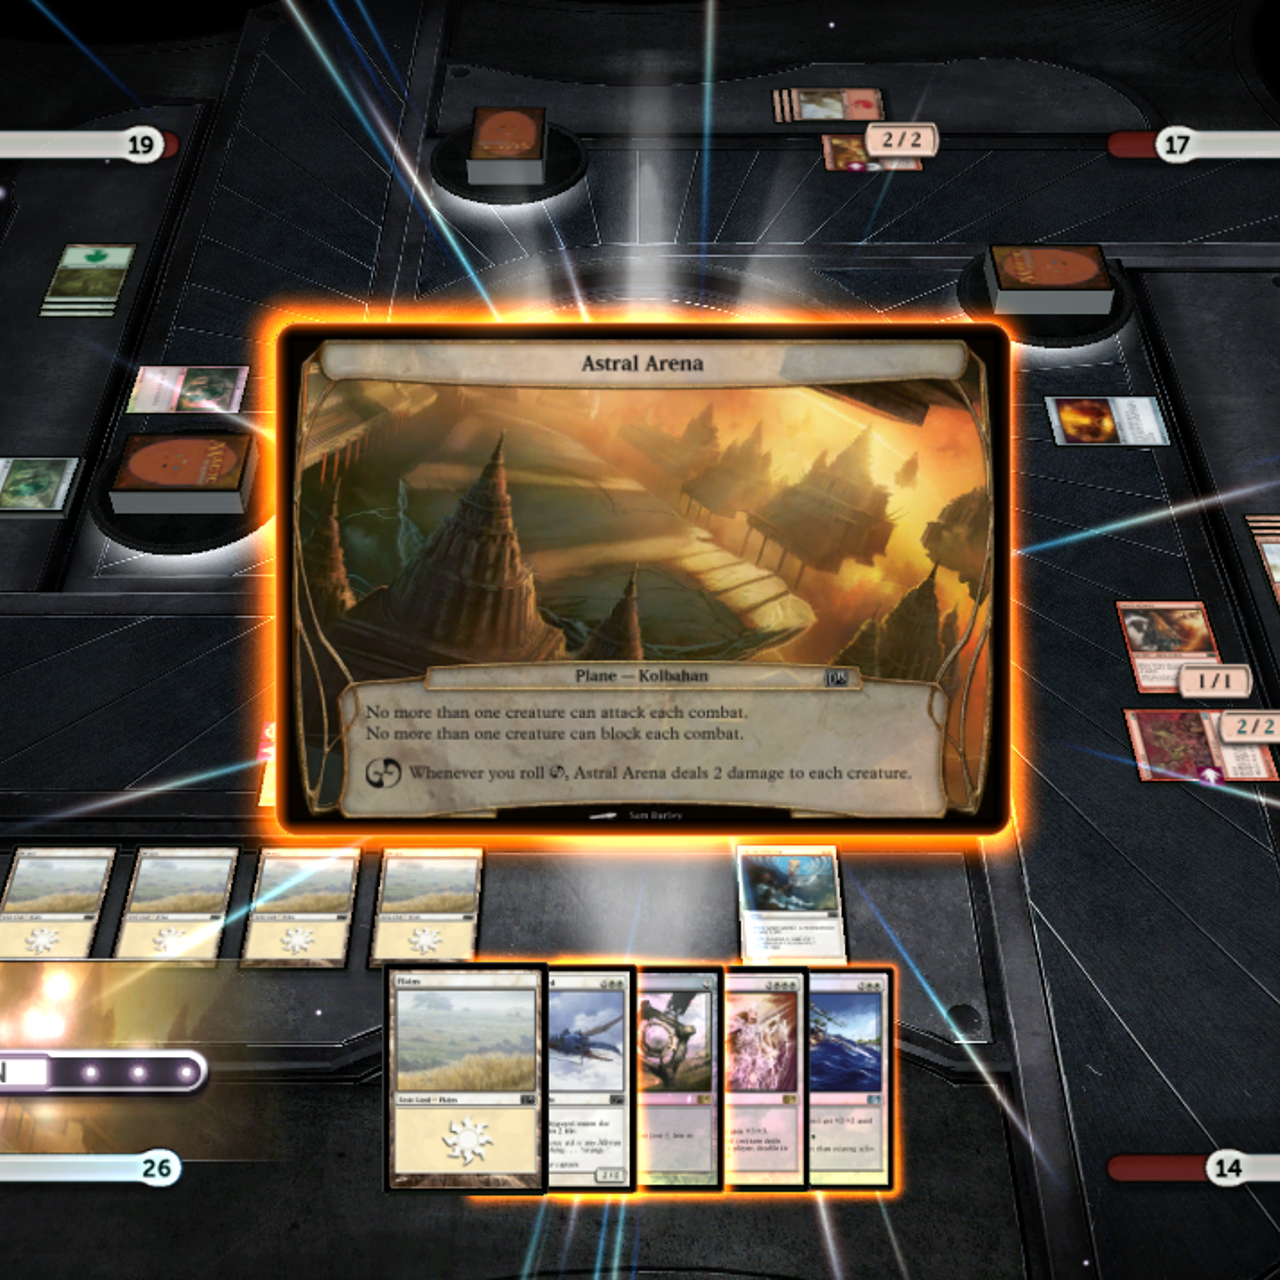 Screenshot showing a close up of an Astral Arena Card, with a player in each of the four corners of the game screen